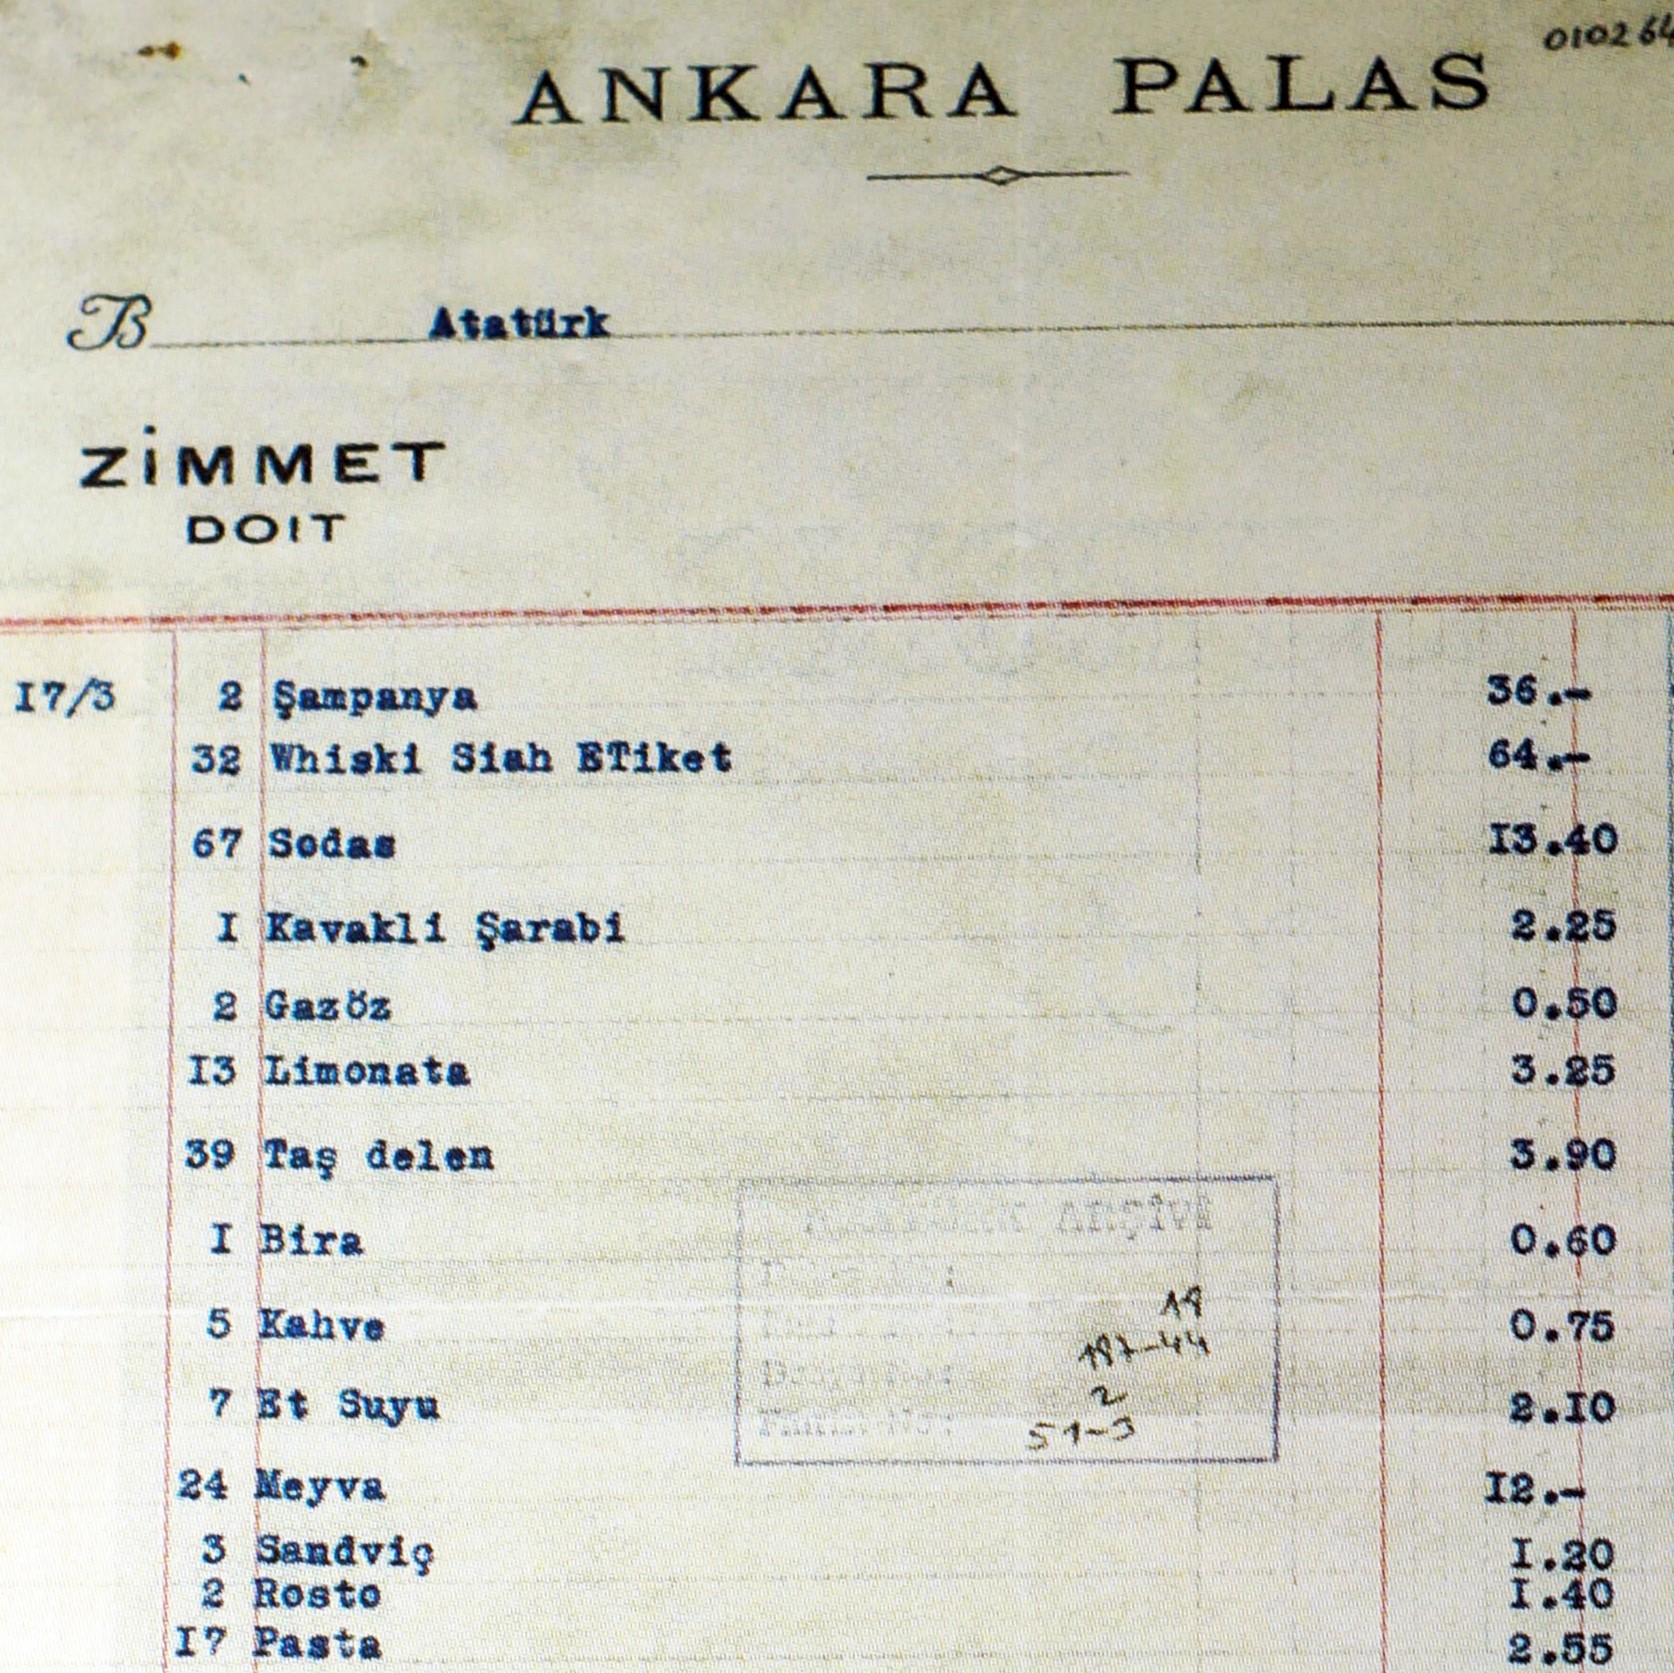 Soner Cagaptay on Twitter: "A night of drinking with Ataturk in 1928: 32  Black Label whiskies 1 Kavaklidere wine 2 champagnes 1 beer 67 sodas!" /  Twitter